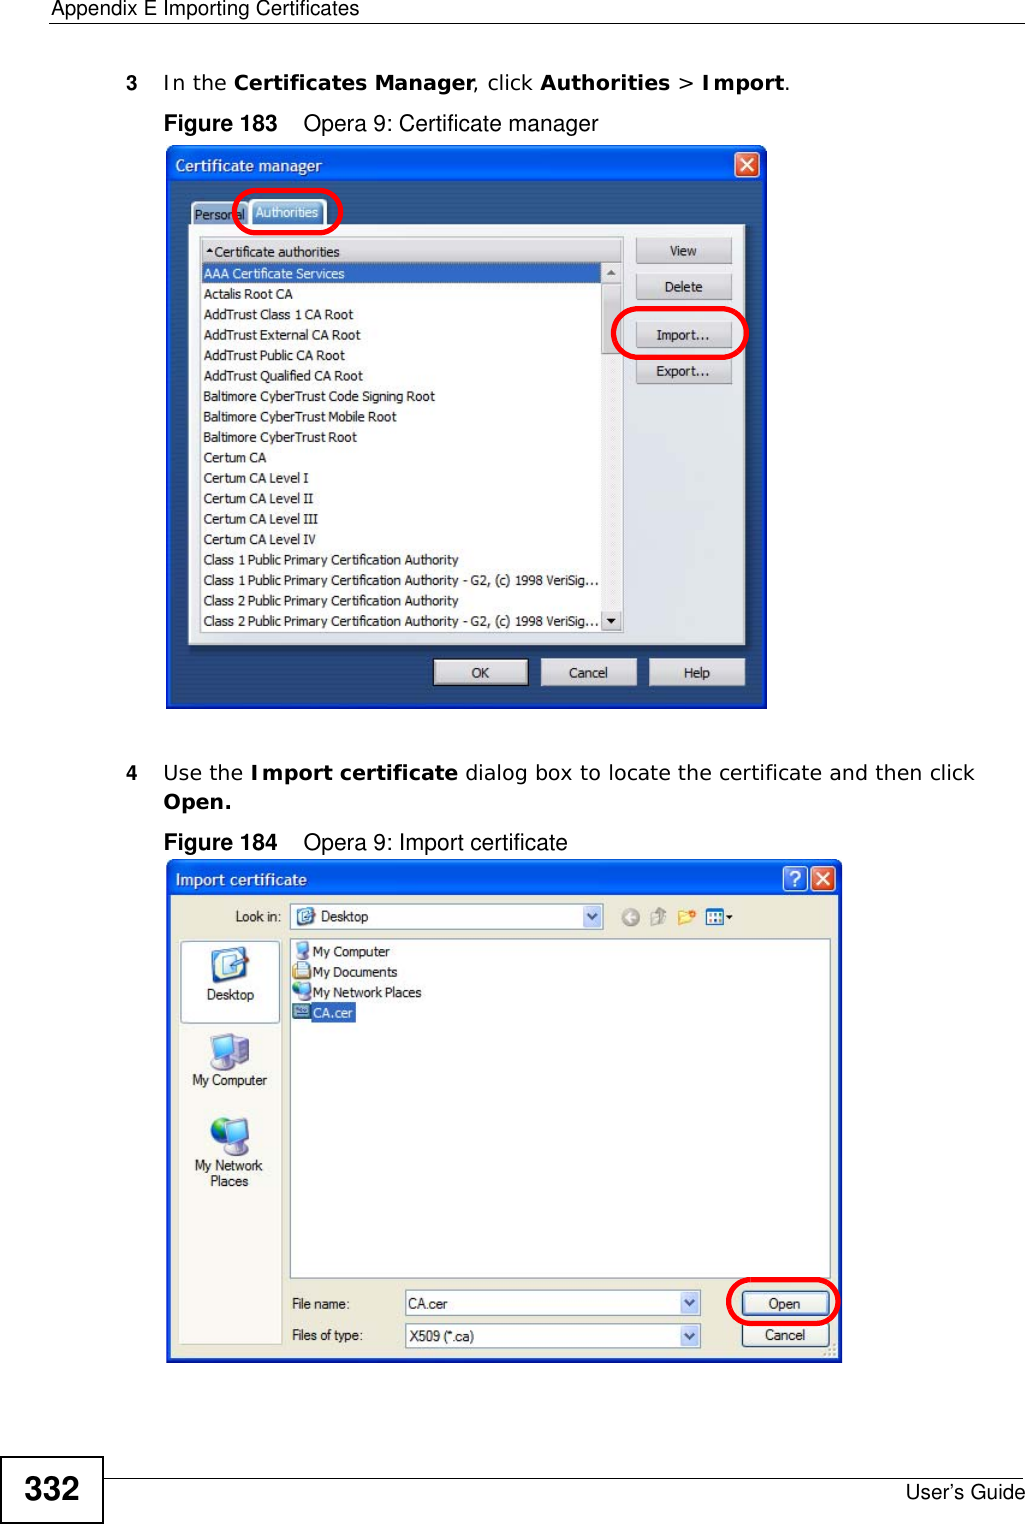 Appendix E Importing CertificatesUser’s Guide3323In the Certificates Manager, click Authorities &gt; Import.Figure 183    Opera 9: Certificate manager4Use the Import certificate dialog box to locate the certificate and then click Open.Figure 184    Opera 9: Import certificate